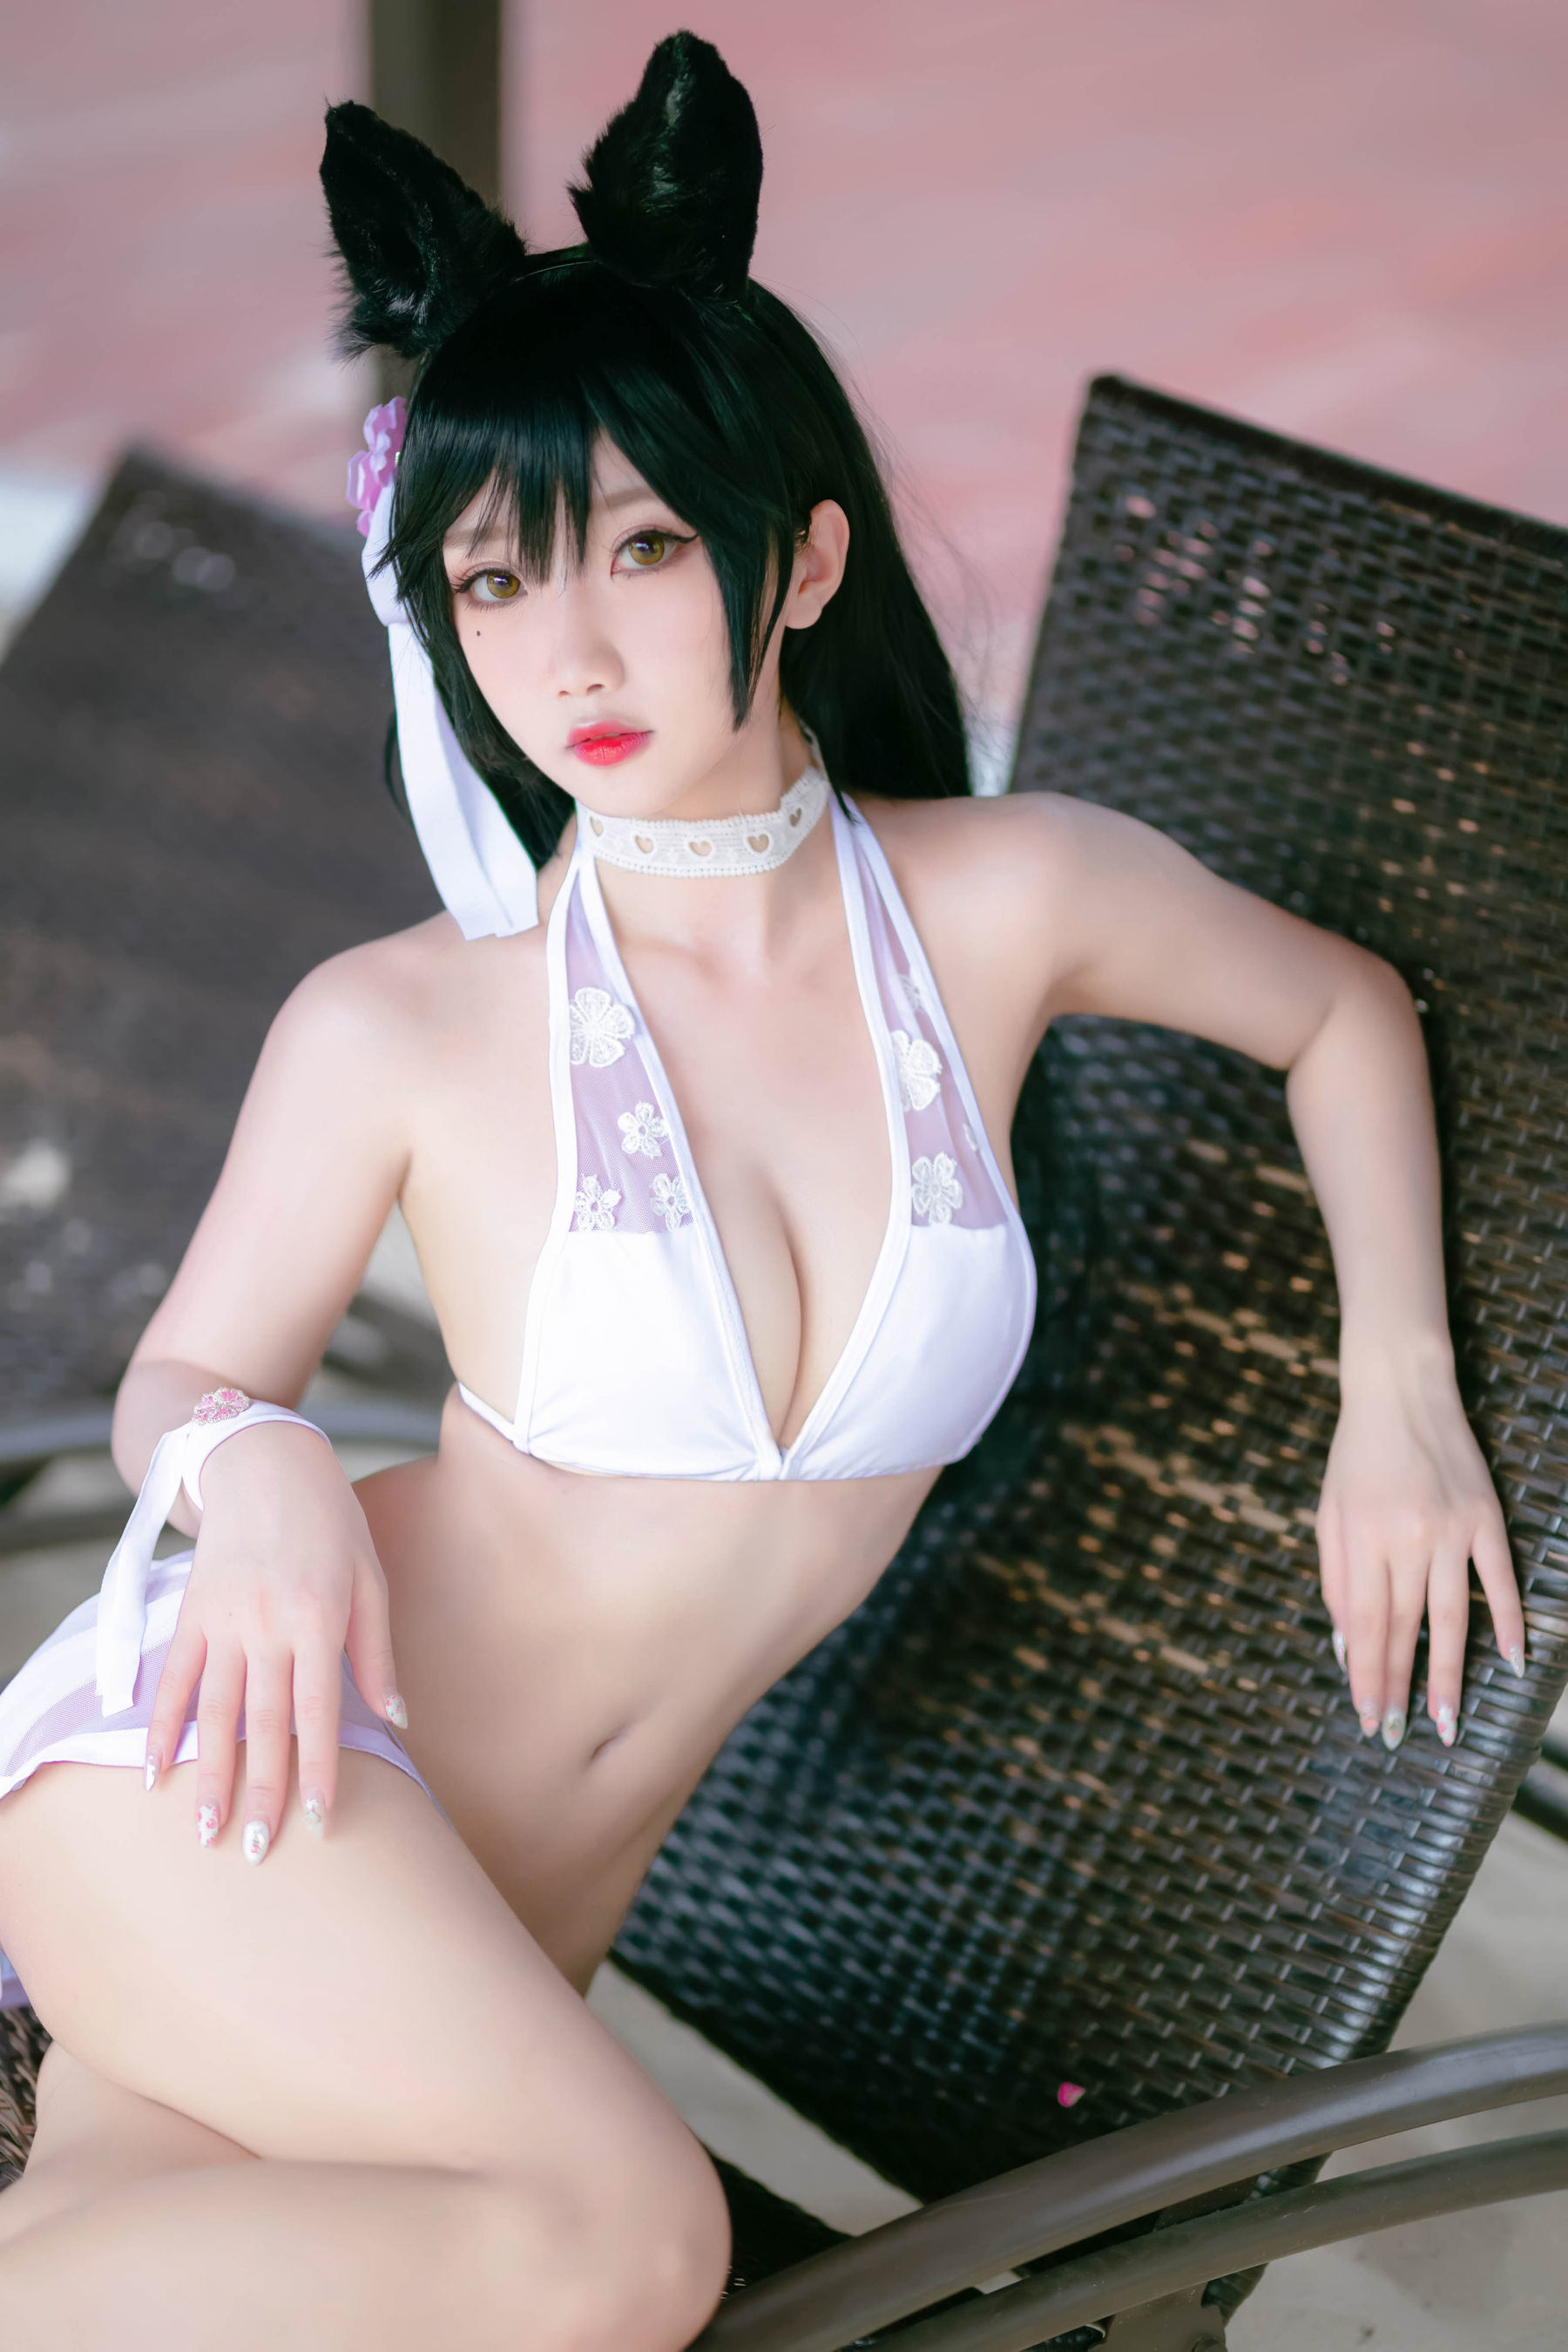 Ghost animals are not in the W “swimsuit cat women’s out” [cosplay welfare] photo set